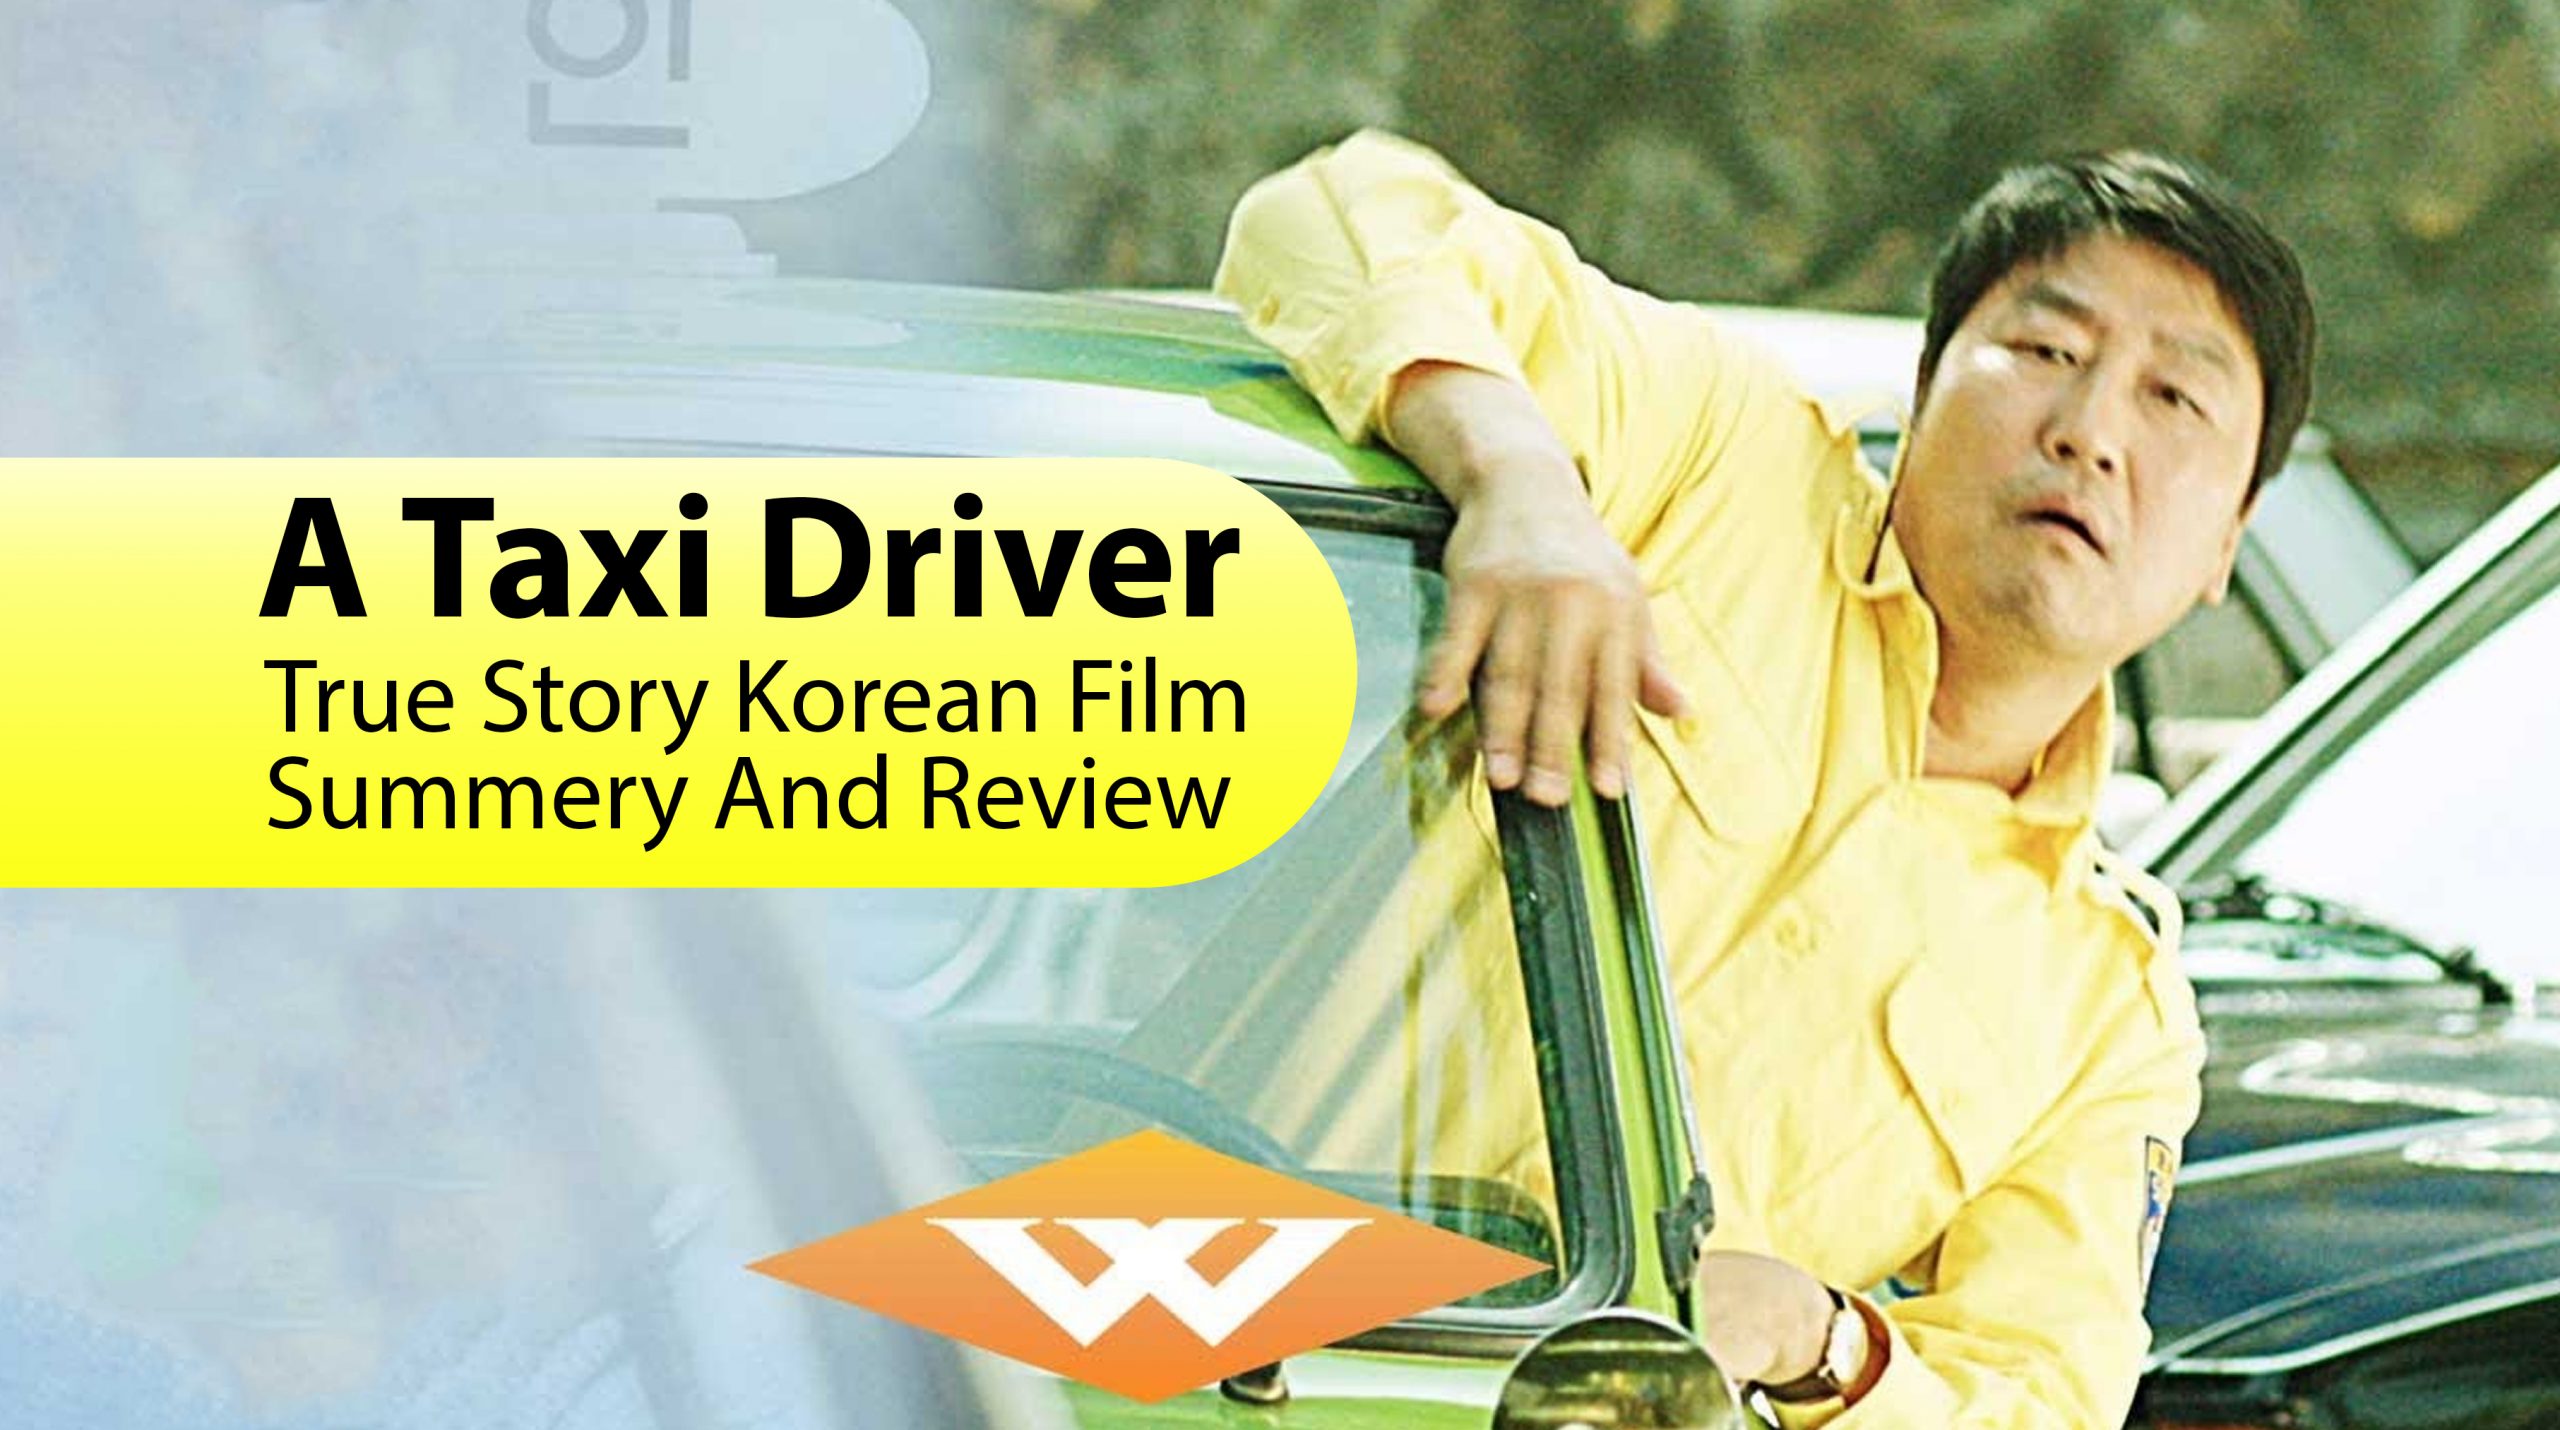 A Taxi Driver | True Story Korean Film Summery And Review